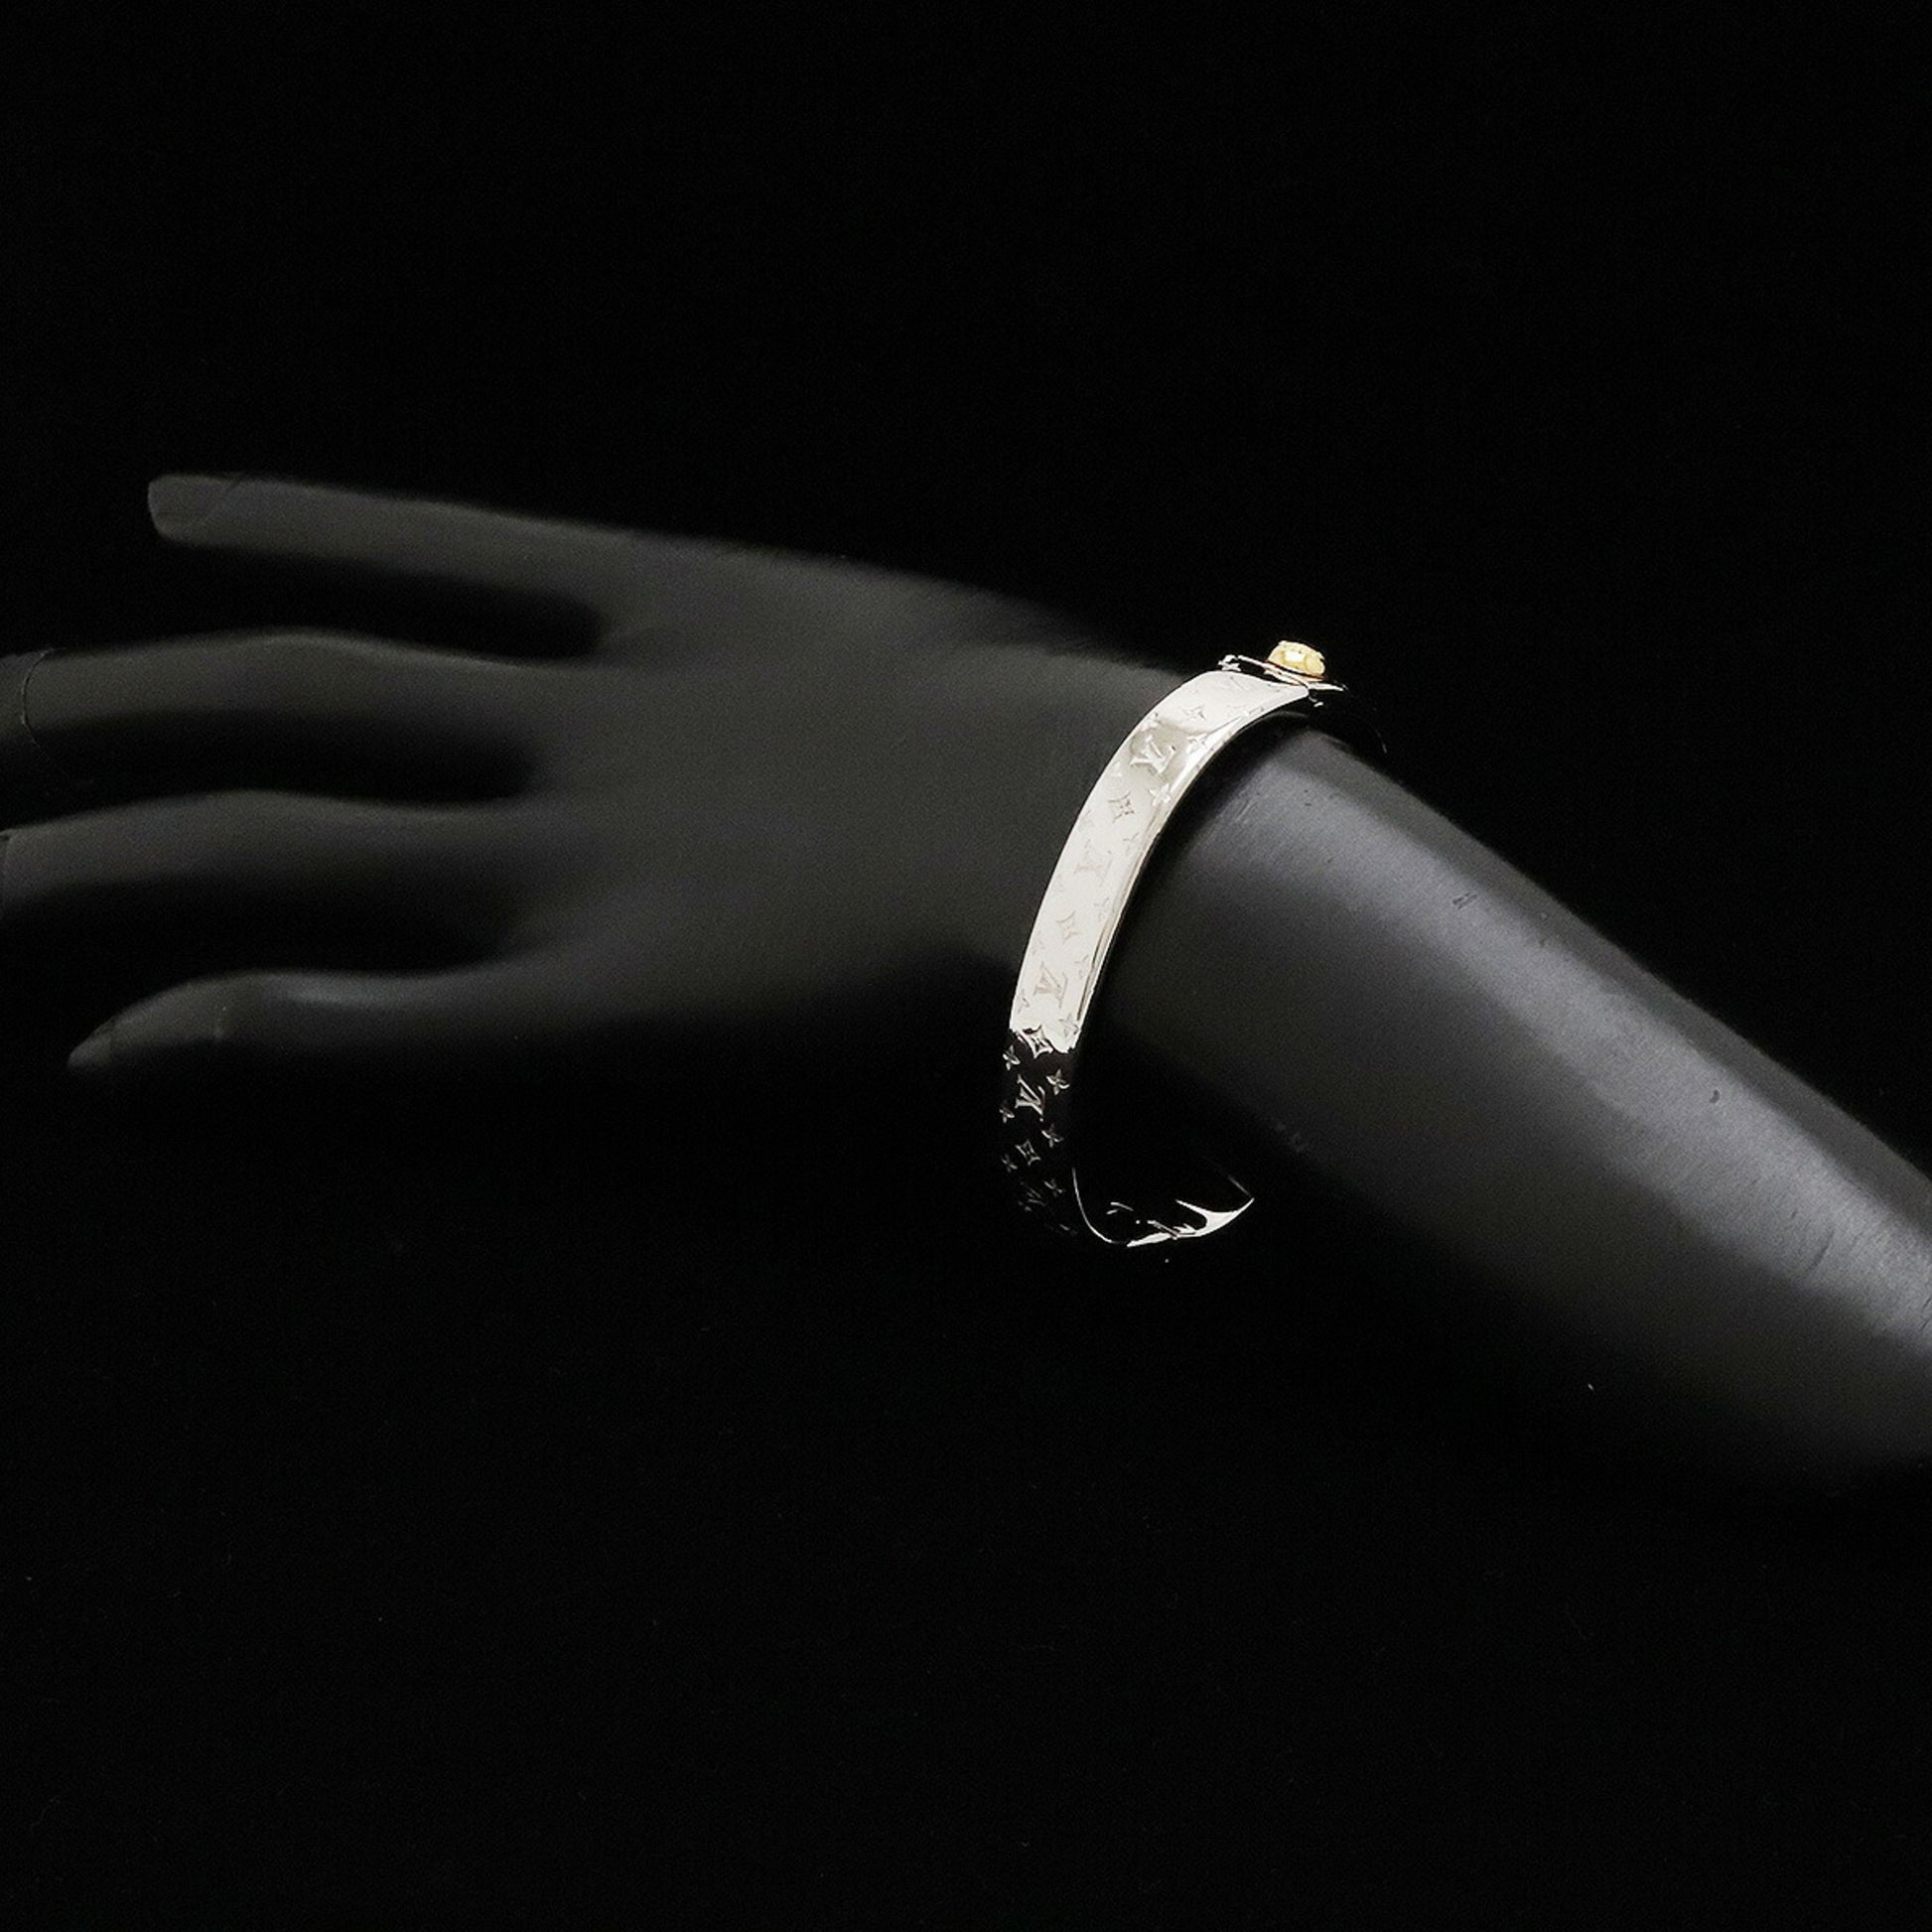 Louis Vuitton bracelet, Nanogram cuff so beautiful! They have size S and M